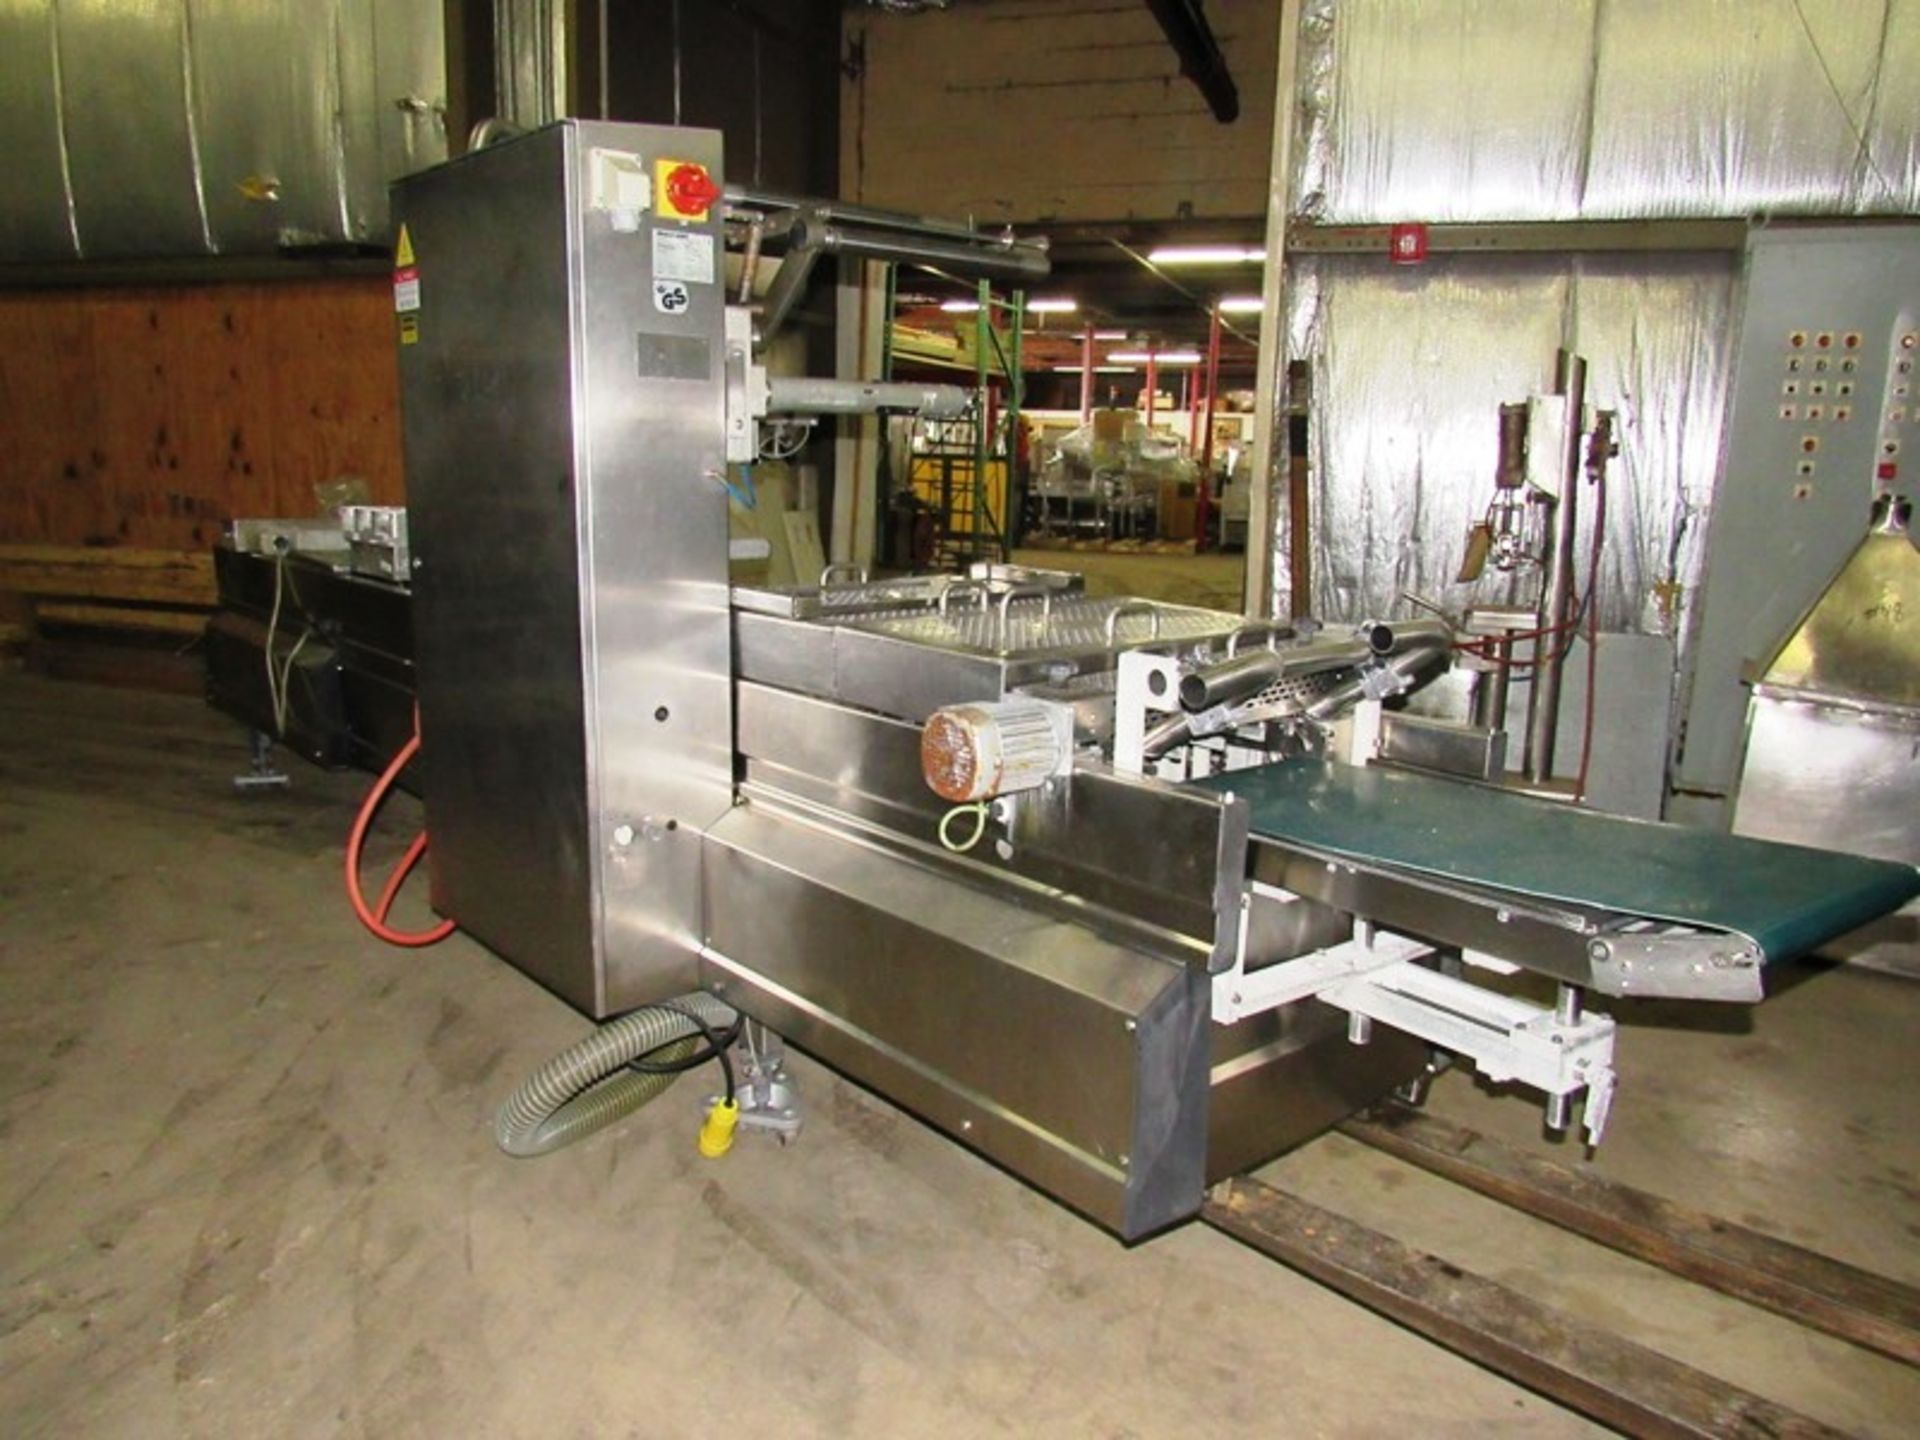 Multivac Mdl. R240 Rollstock Thermoforming Packager, Ser. #106852, approx. 450 mm between chains, - Image 4 of 31